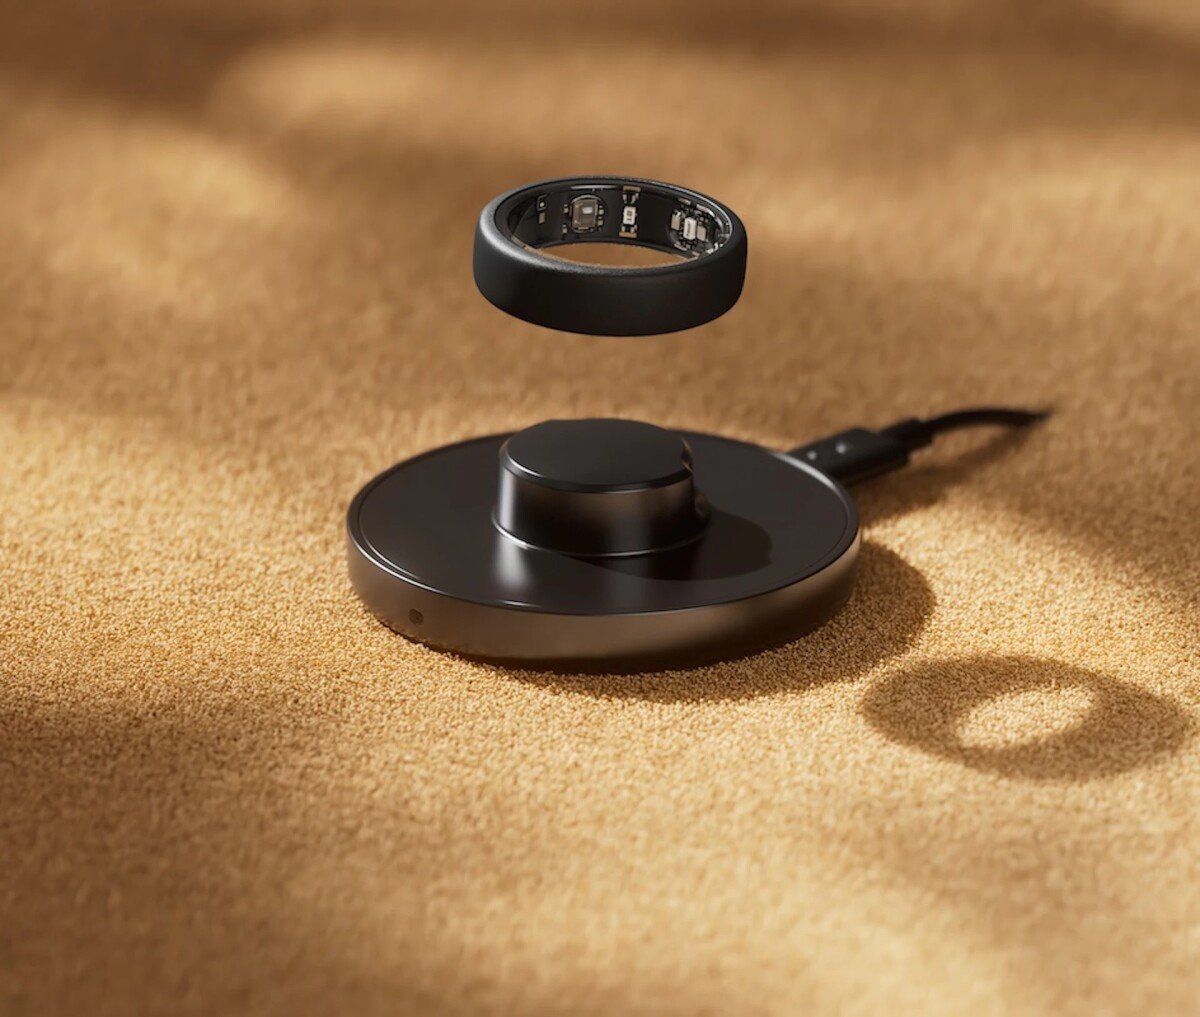 Oura ring official charger and ring